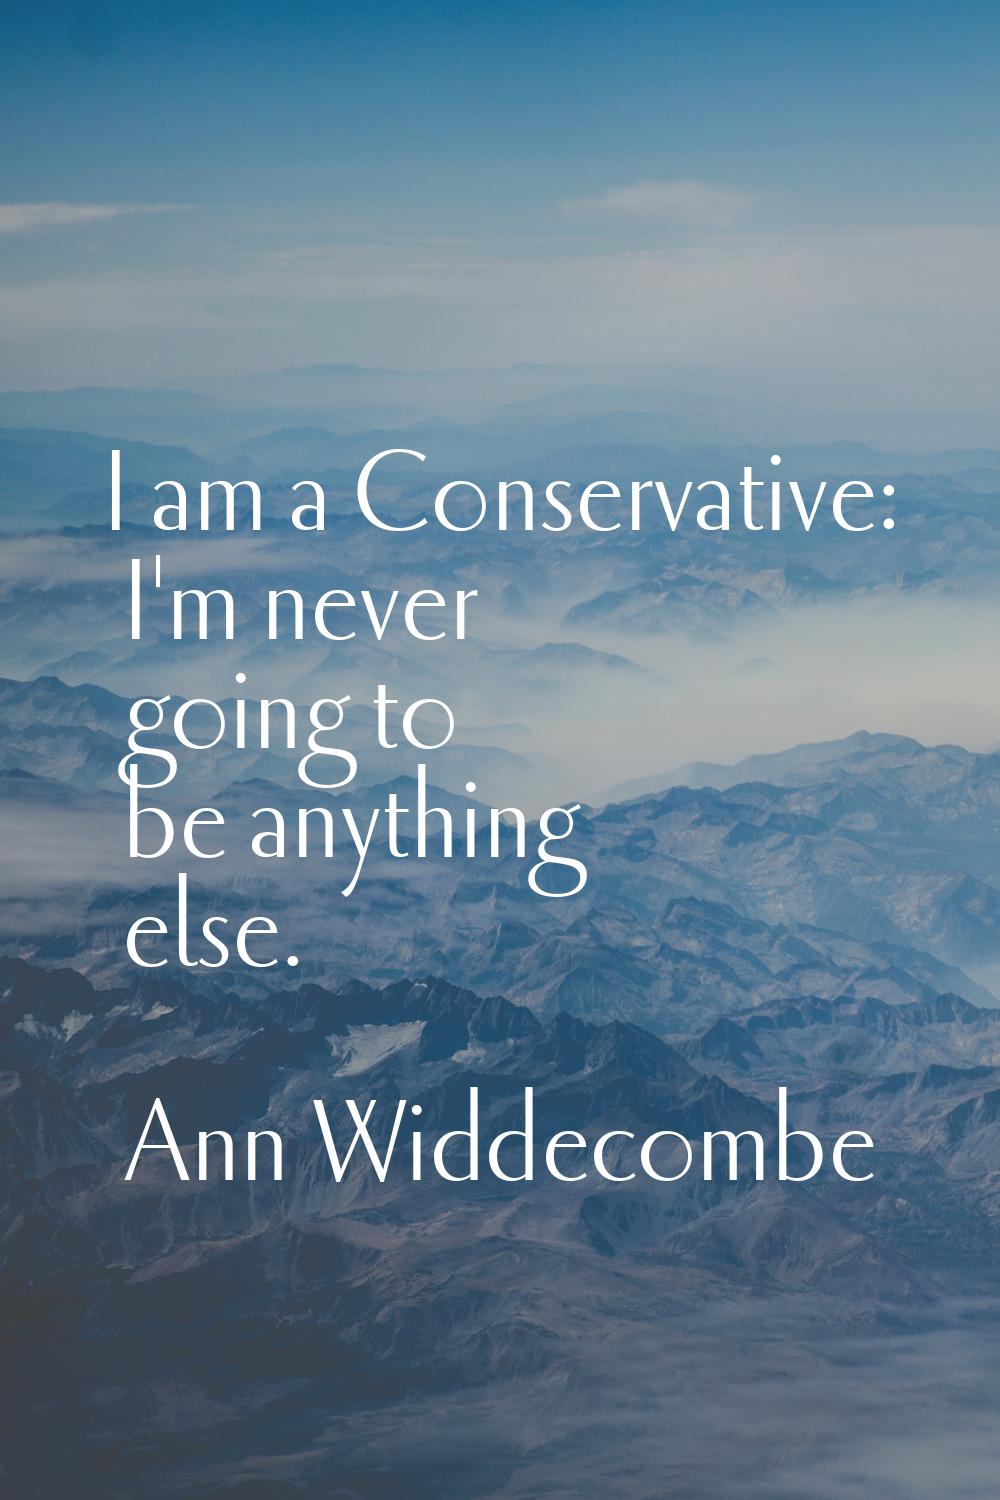 I am a Conservative: I'm never going to be anything else.